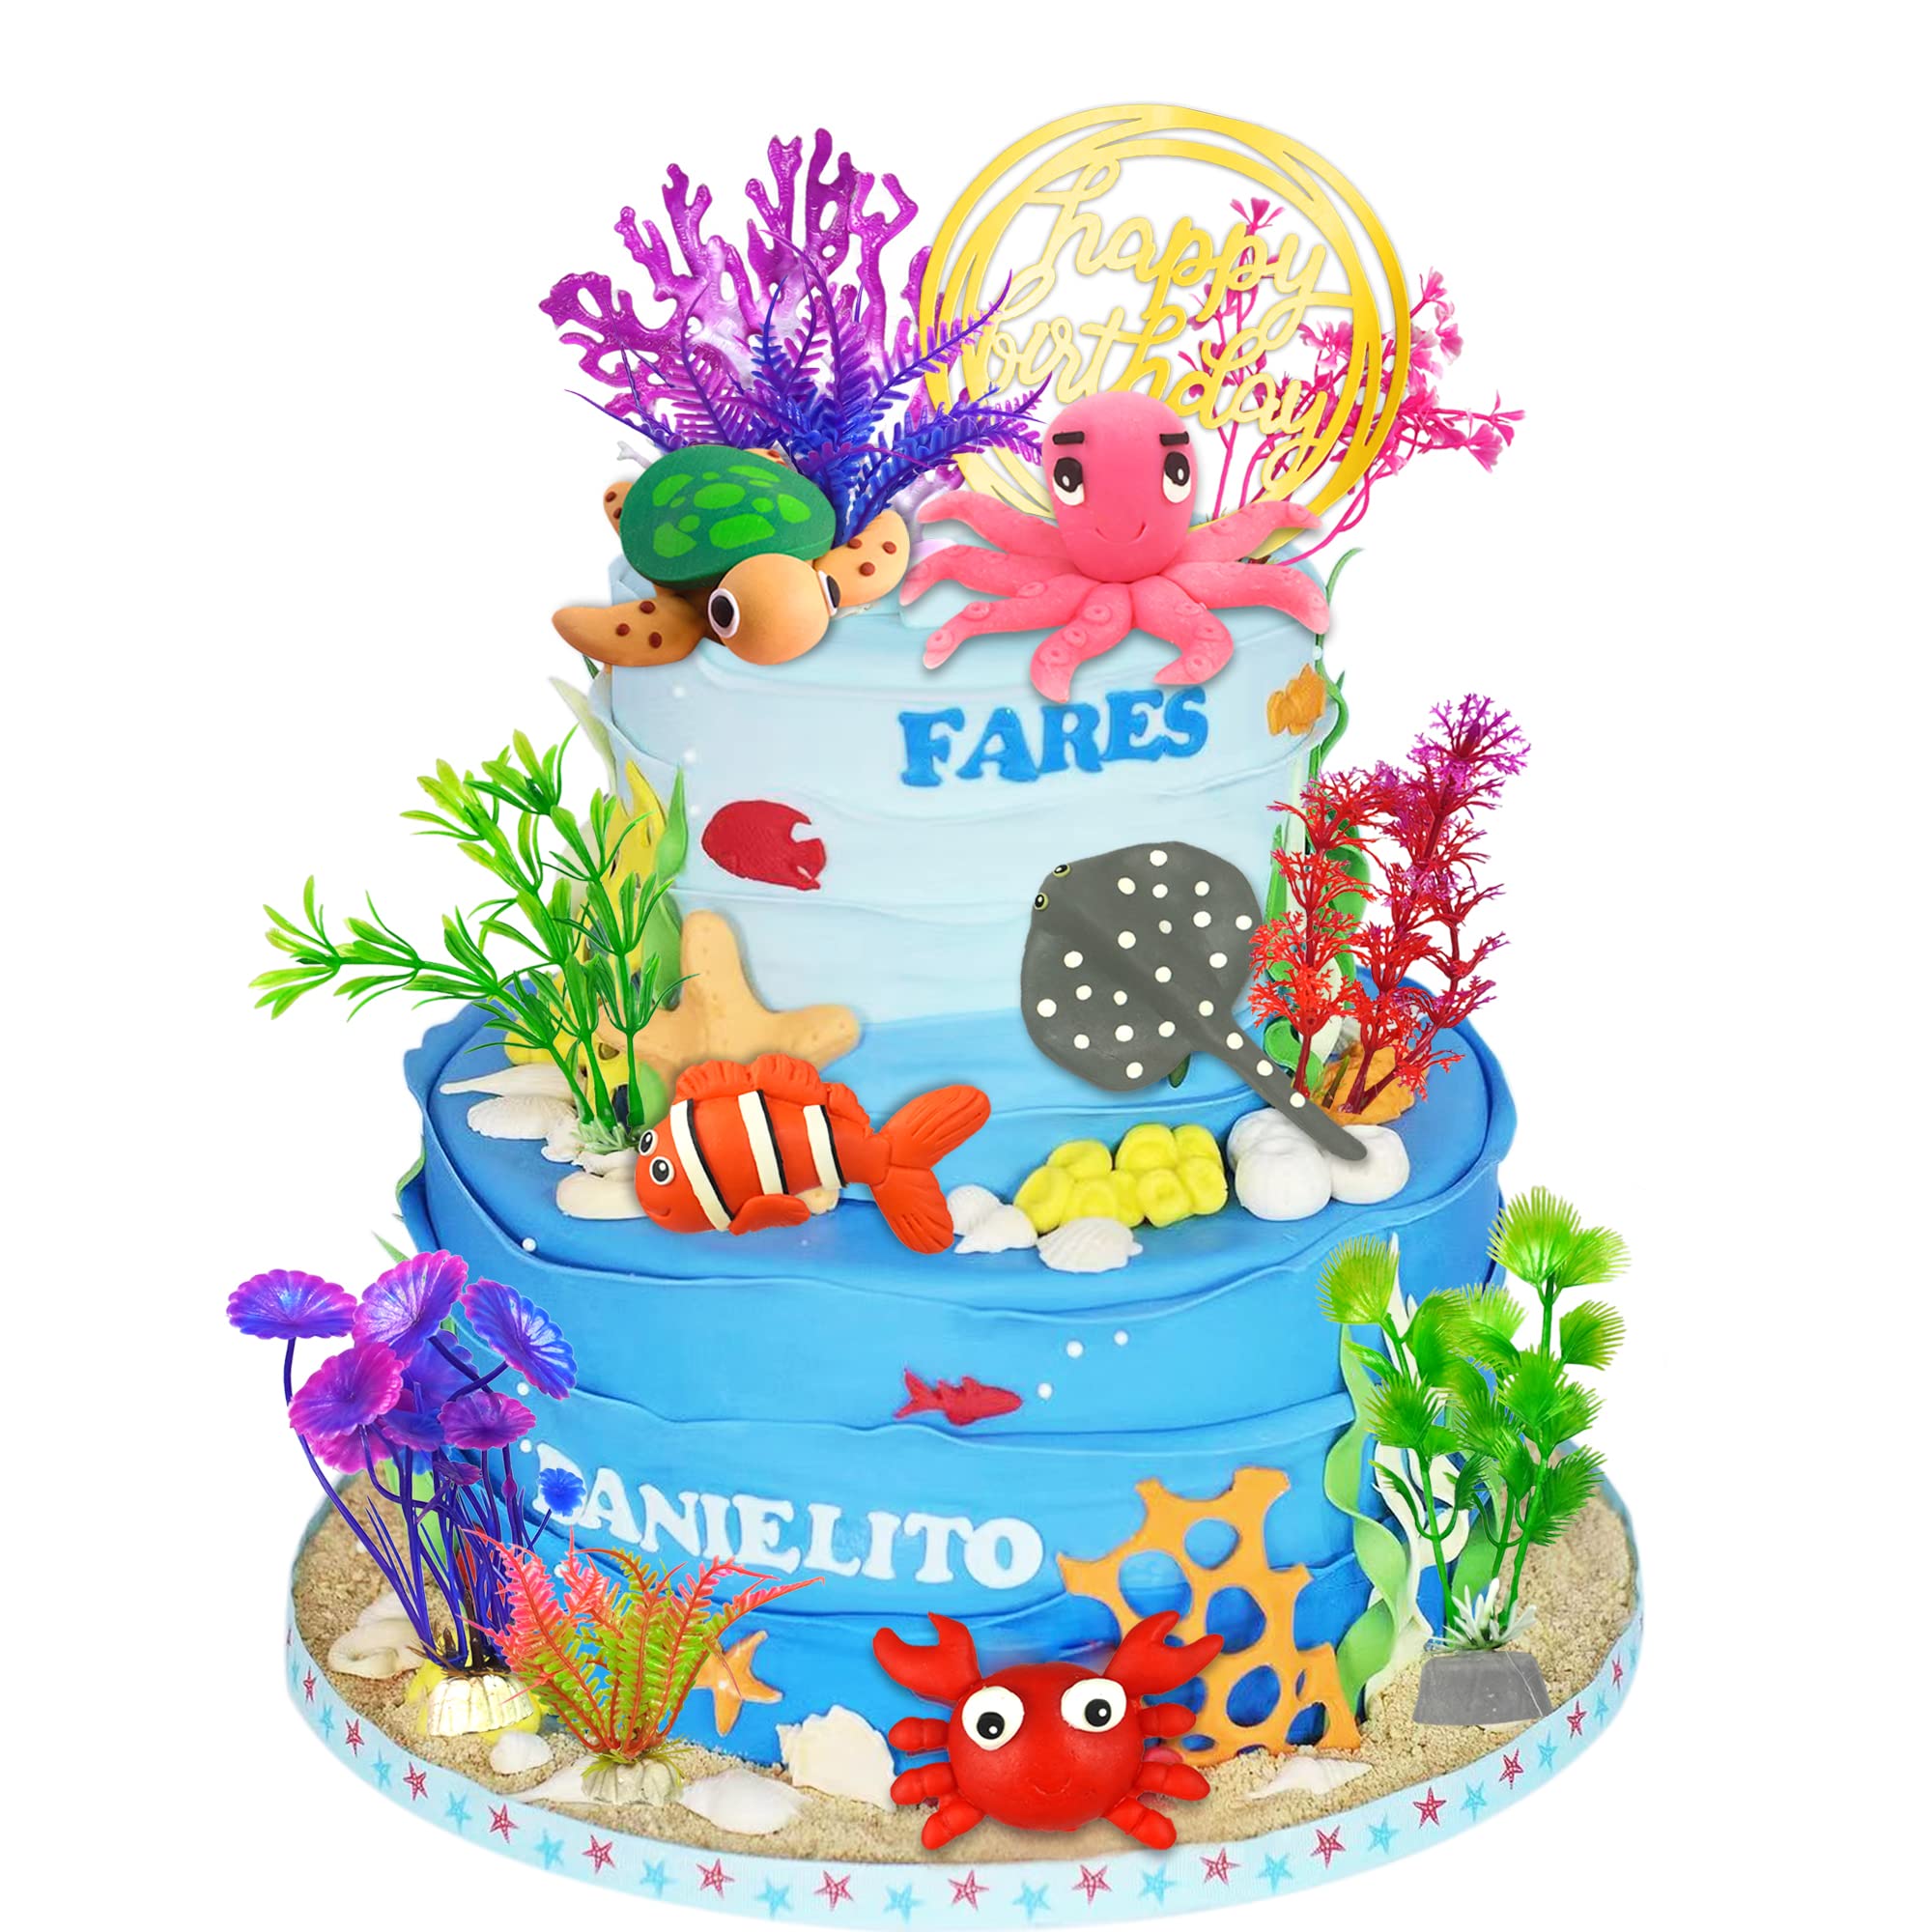 Create a Stunning ocean cake decorations for Your Next Summer Party